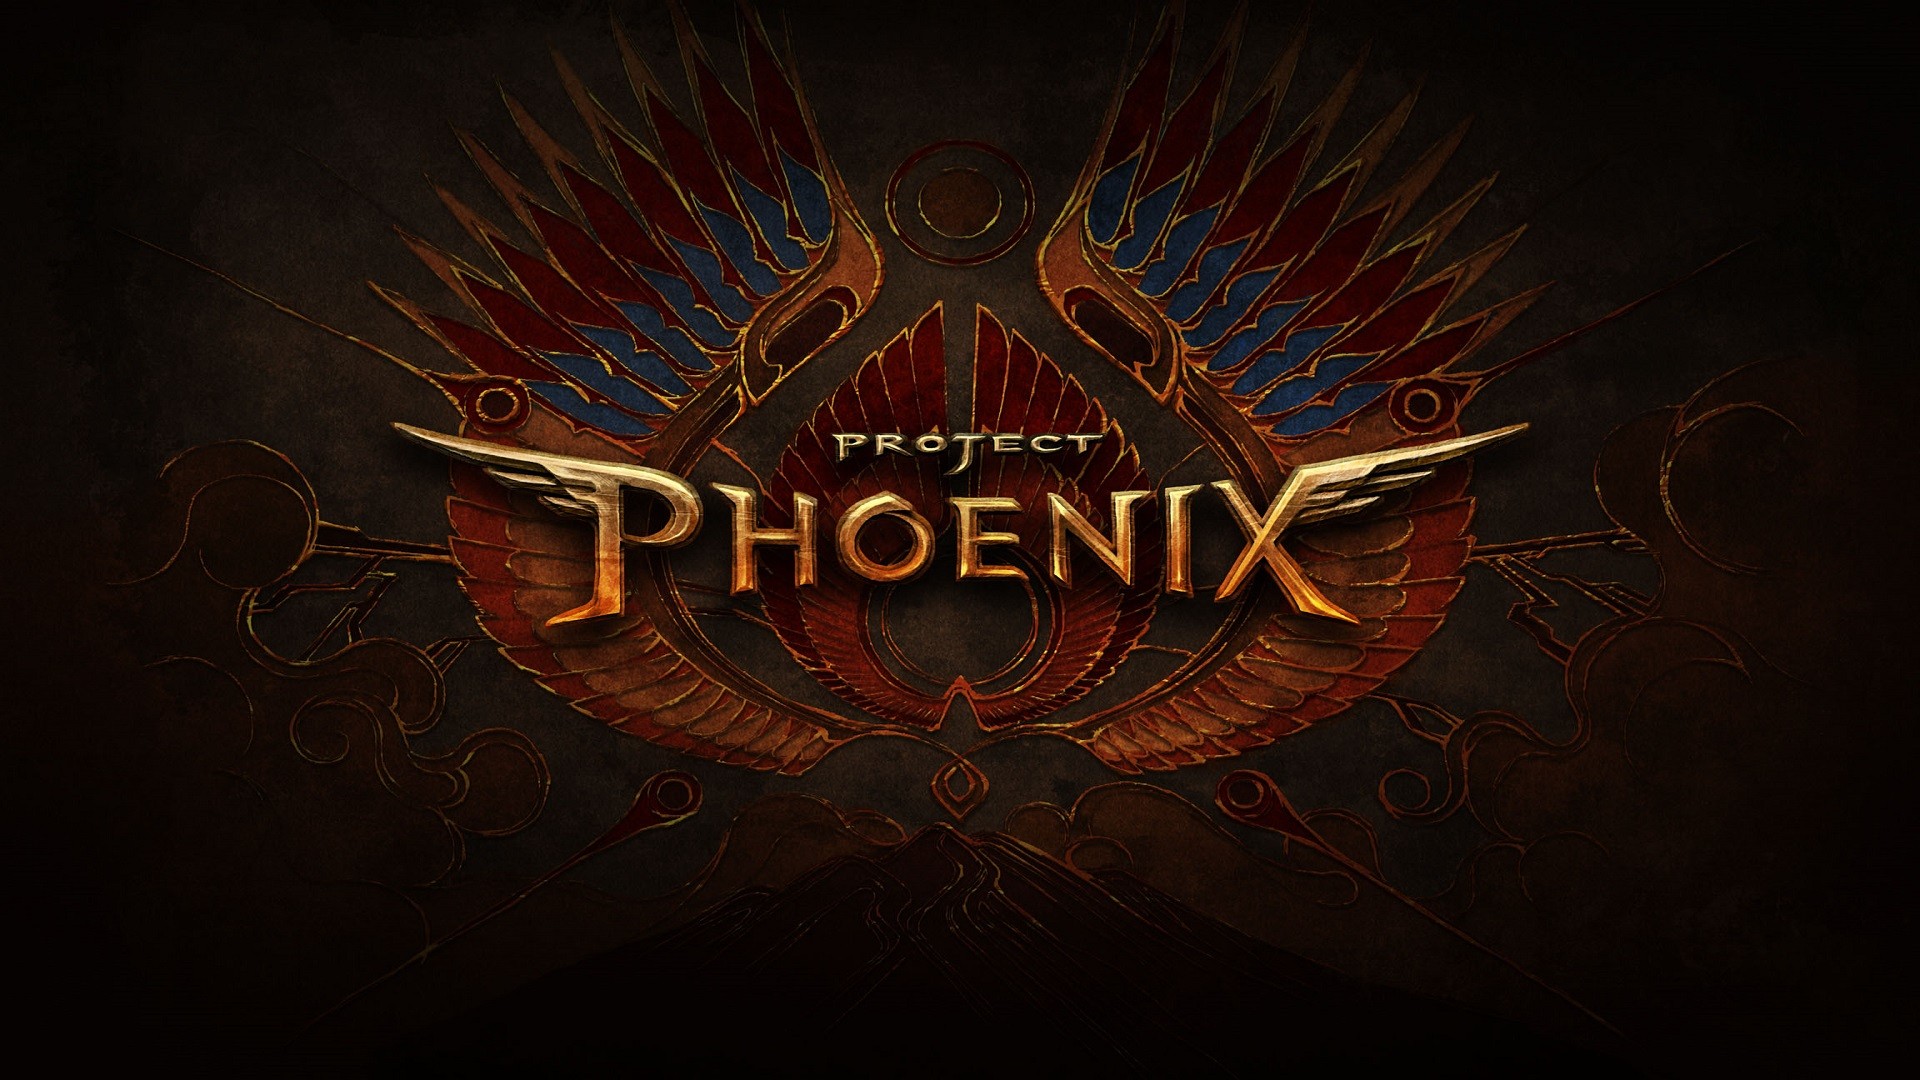 Wallpaper Phoenix HD with image resolution 1920x1080 pixel. You can make this wallpaper for your Desktop Computer Backgrounds, Mac Wallpapers, Android Lock screen or iPhone Screensavers